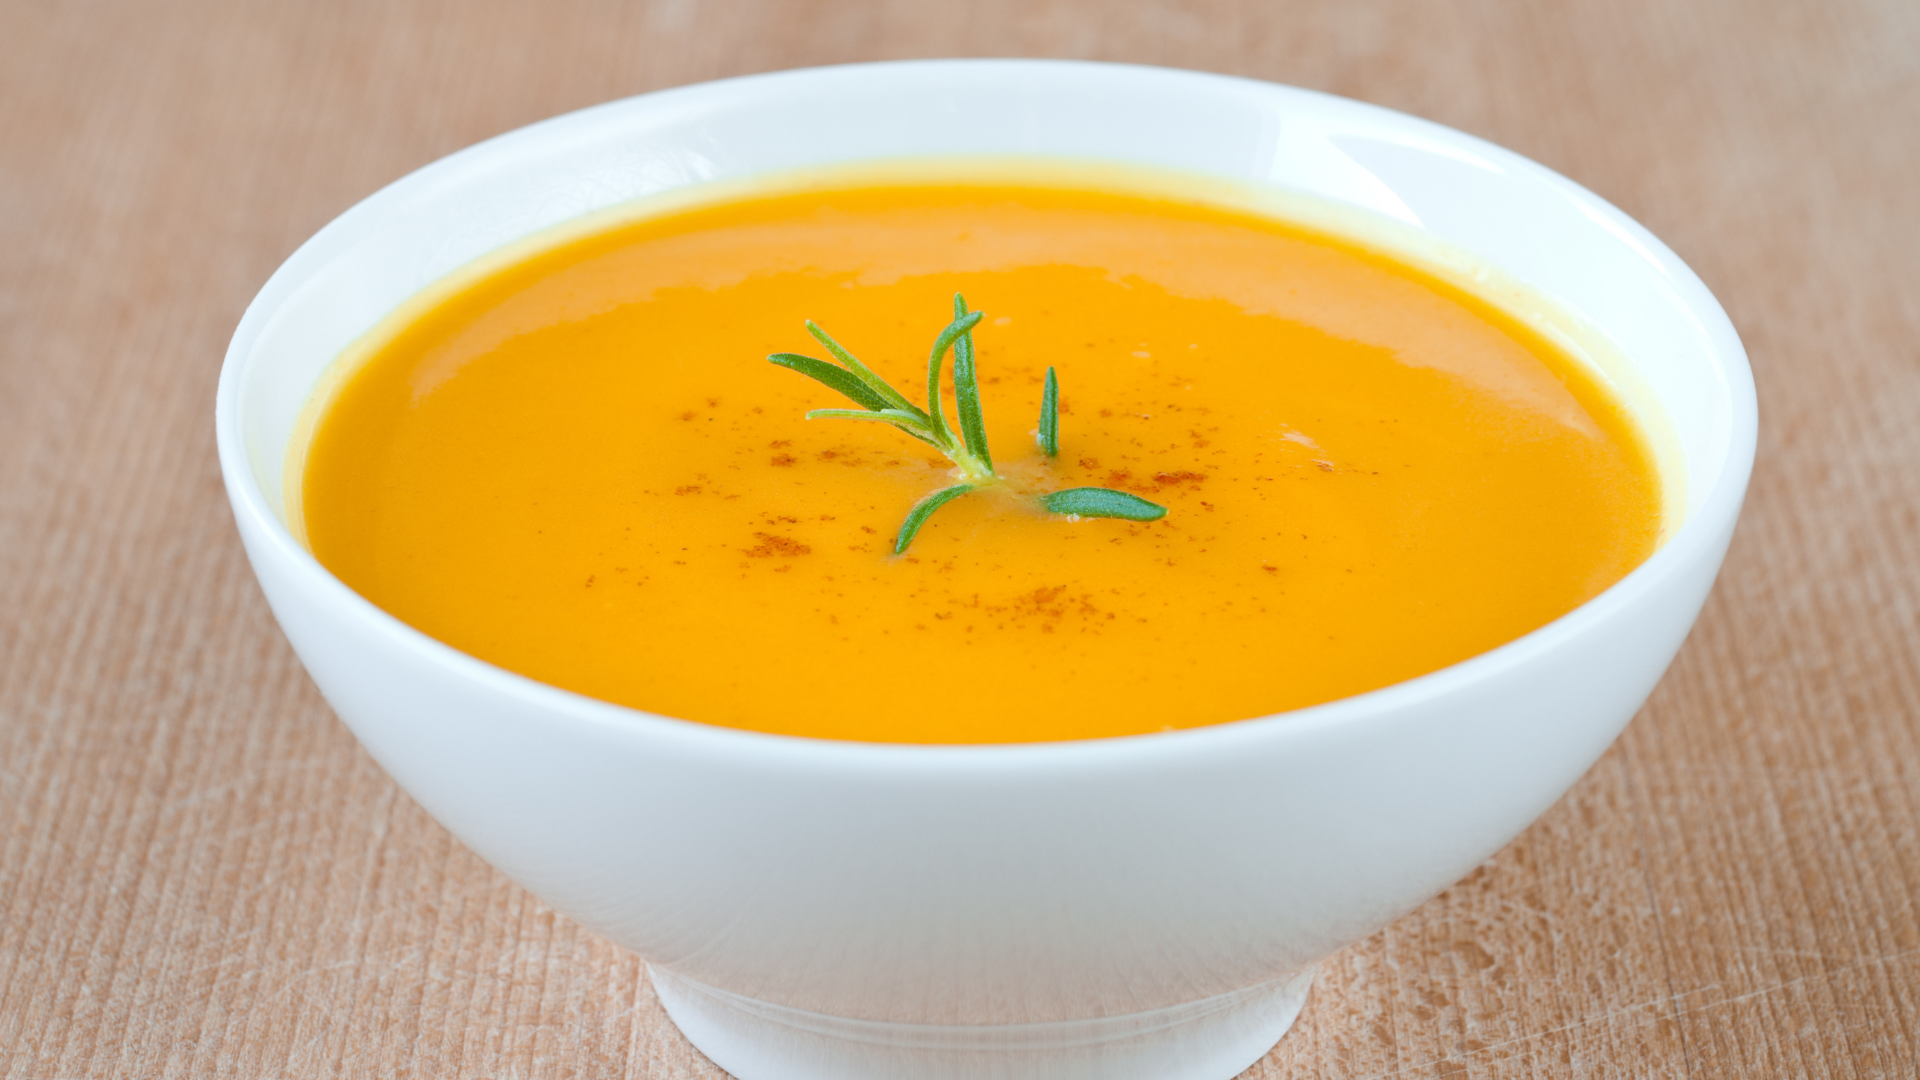 A Healthy Delight: Autumn Vegetable Soup in Just 20 Minutes